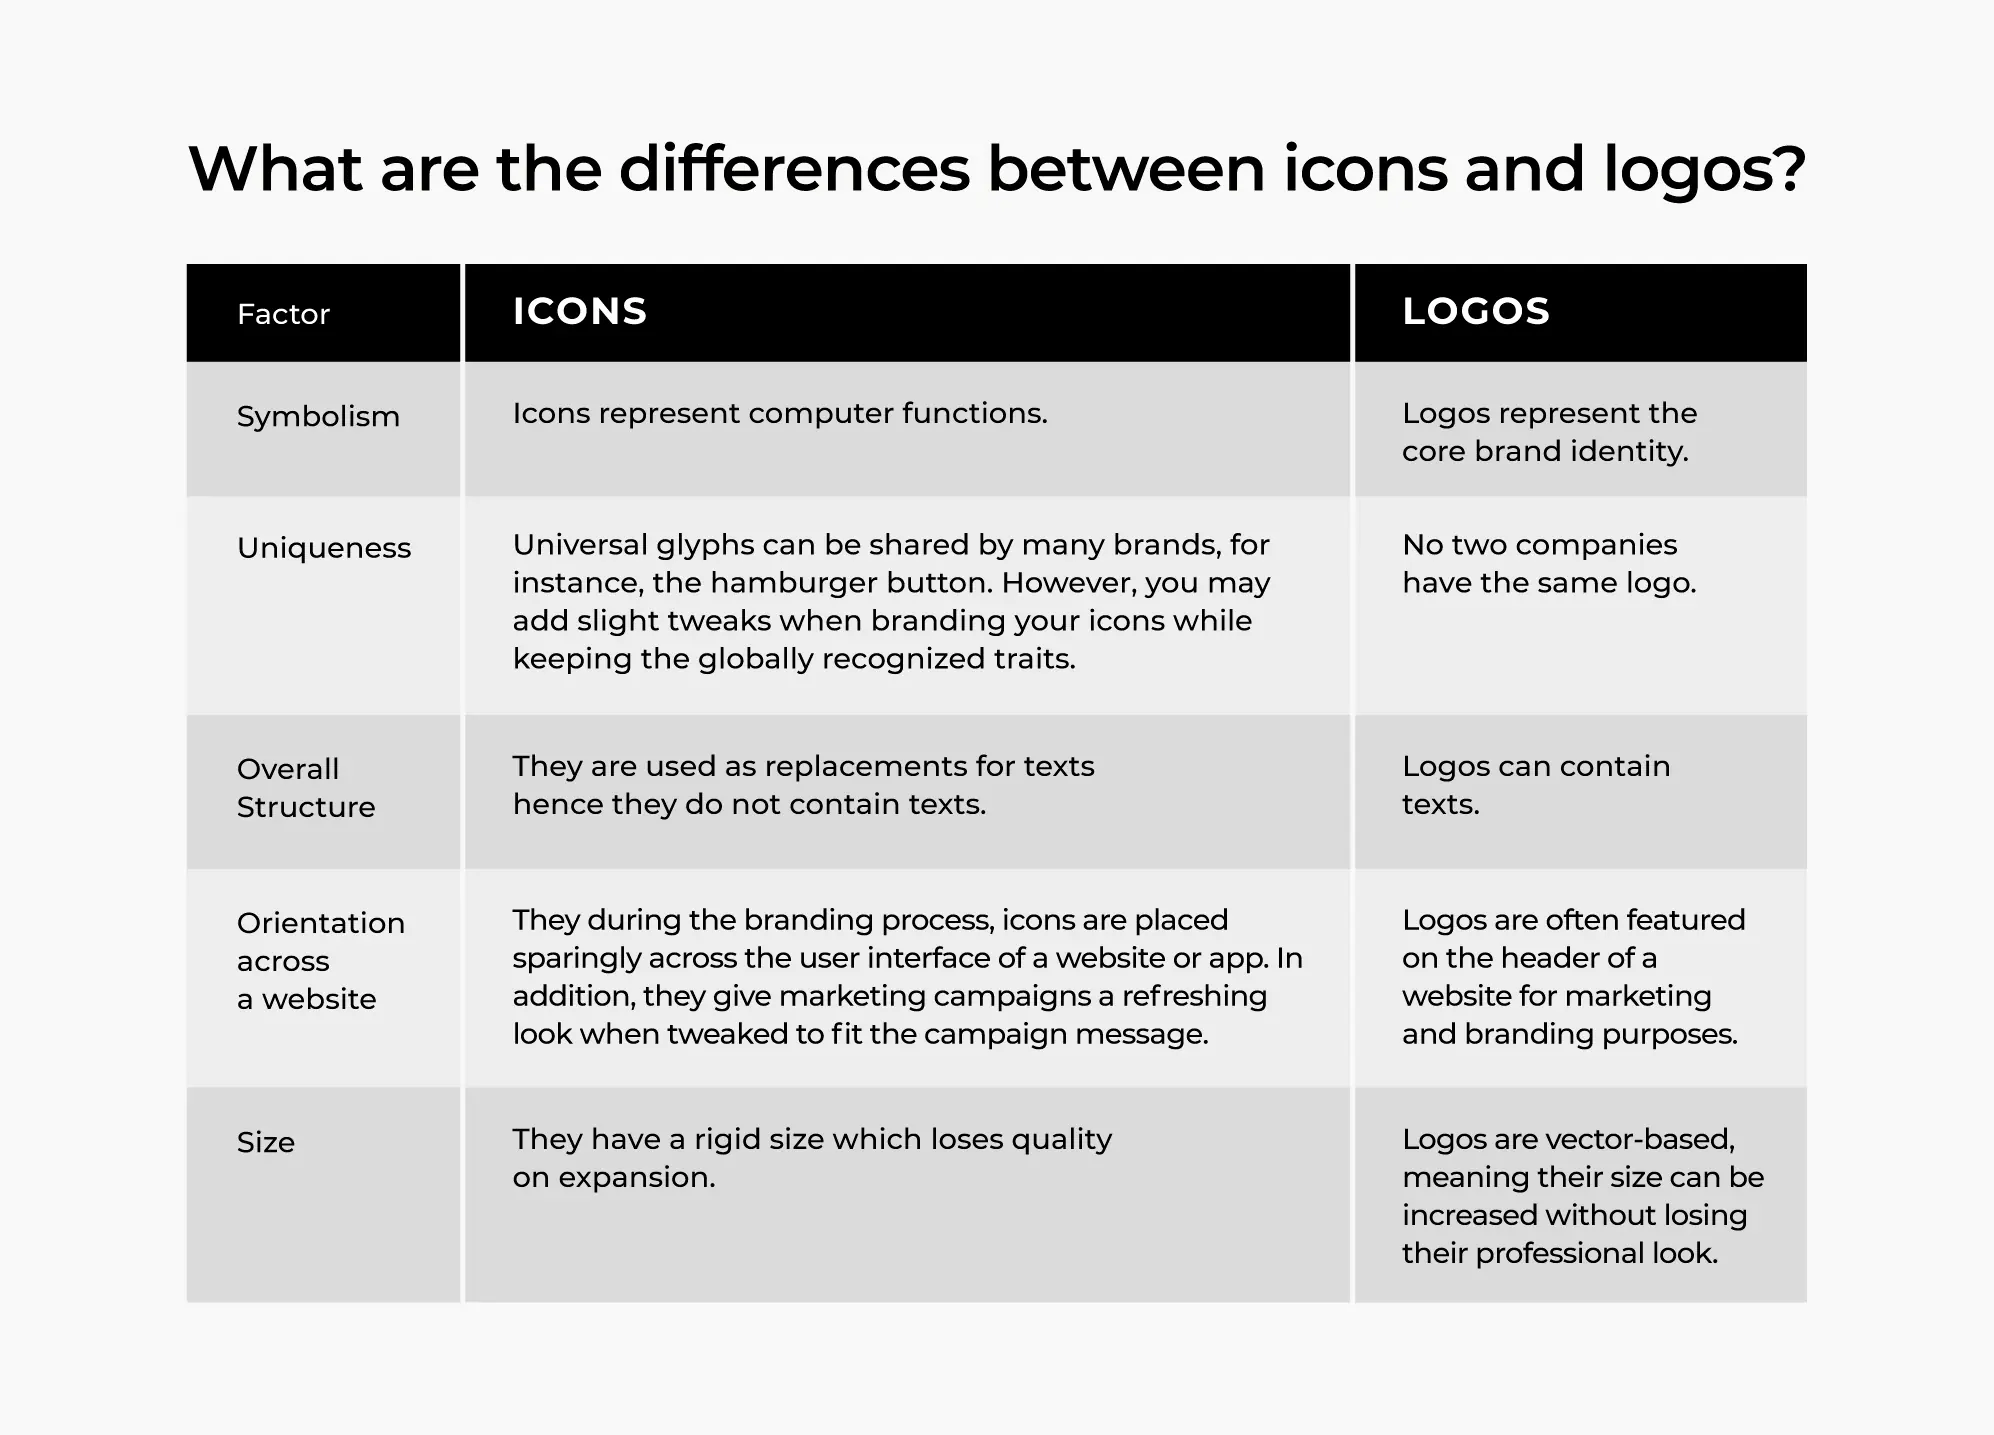 Differences between icons and logos